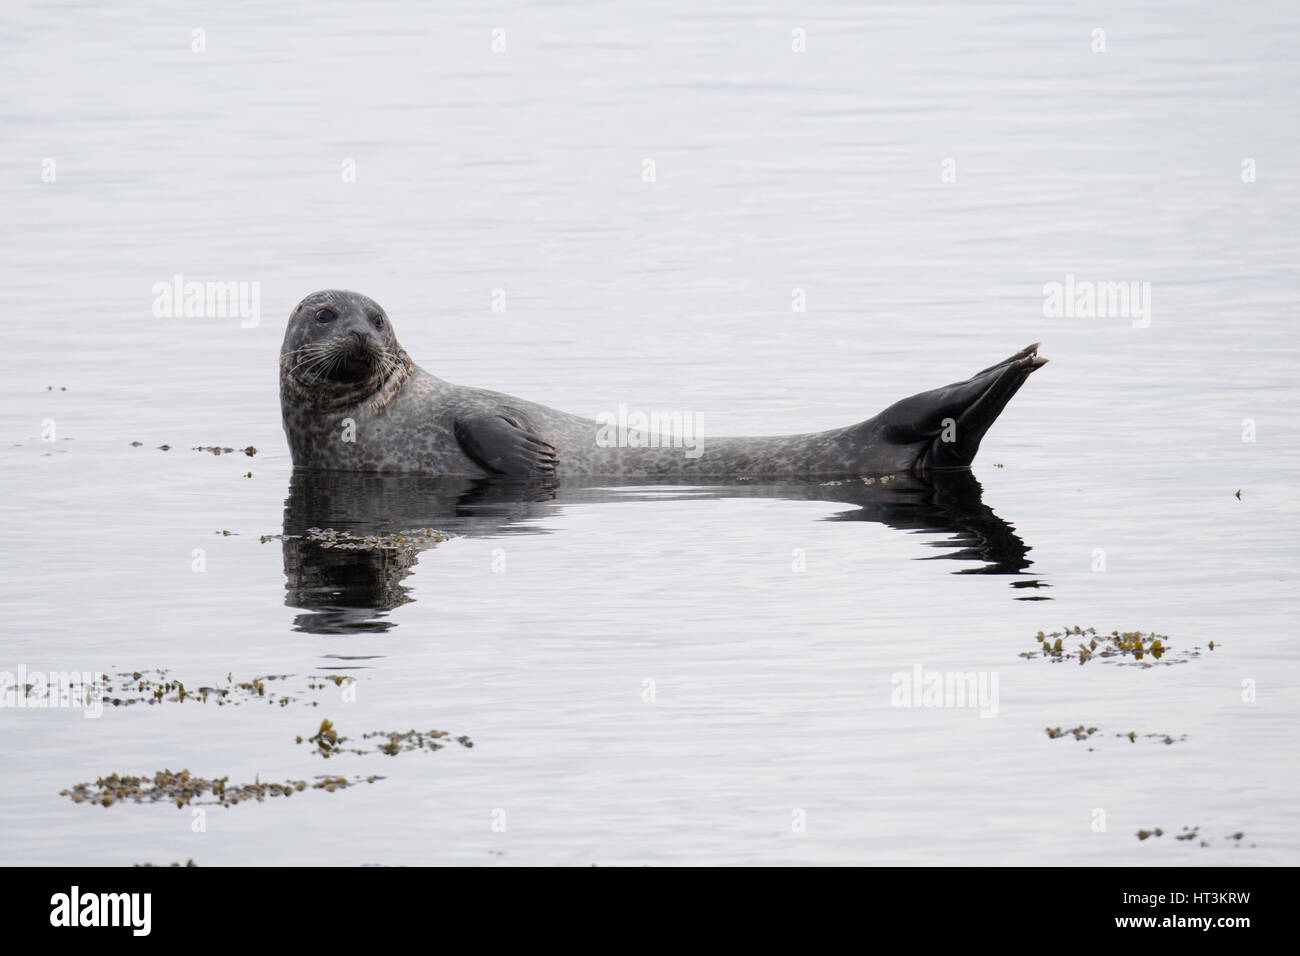 Harbor or harbour or Common seal, Phoca vitulina, portrait, at Isafjordur, Northern Iceland, North Atlantic Ocean Stock Photo